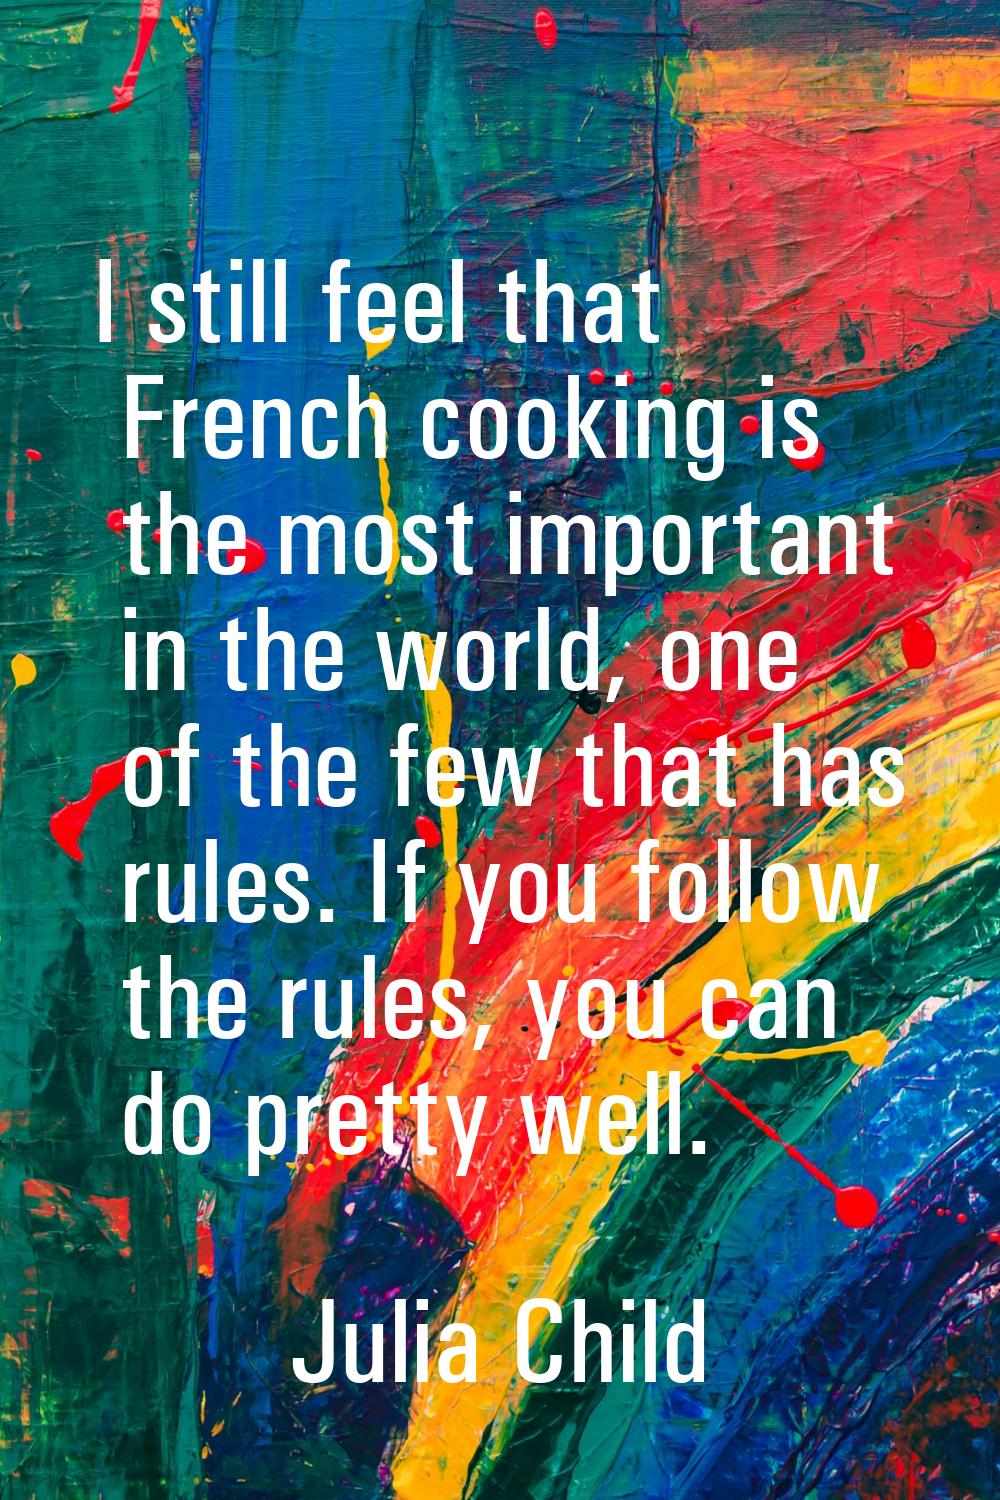 I still feel that French cooking is the most important in the world, one of the few that has rules.